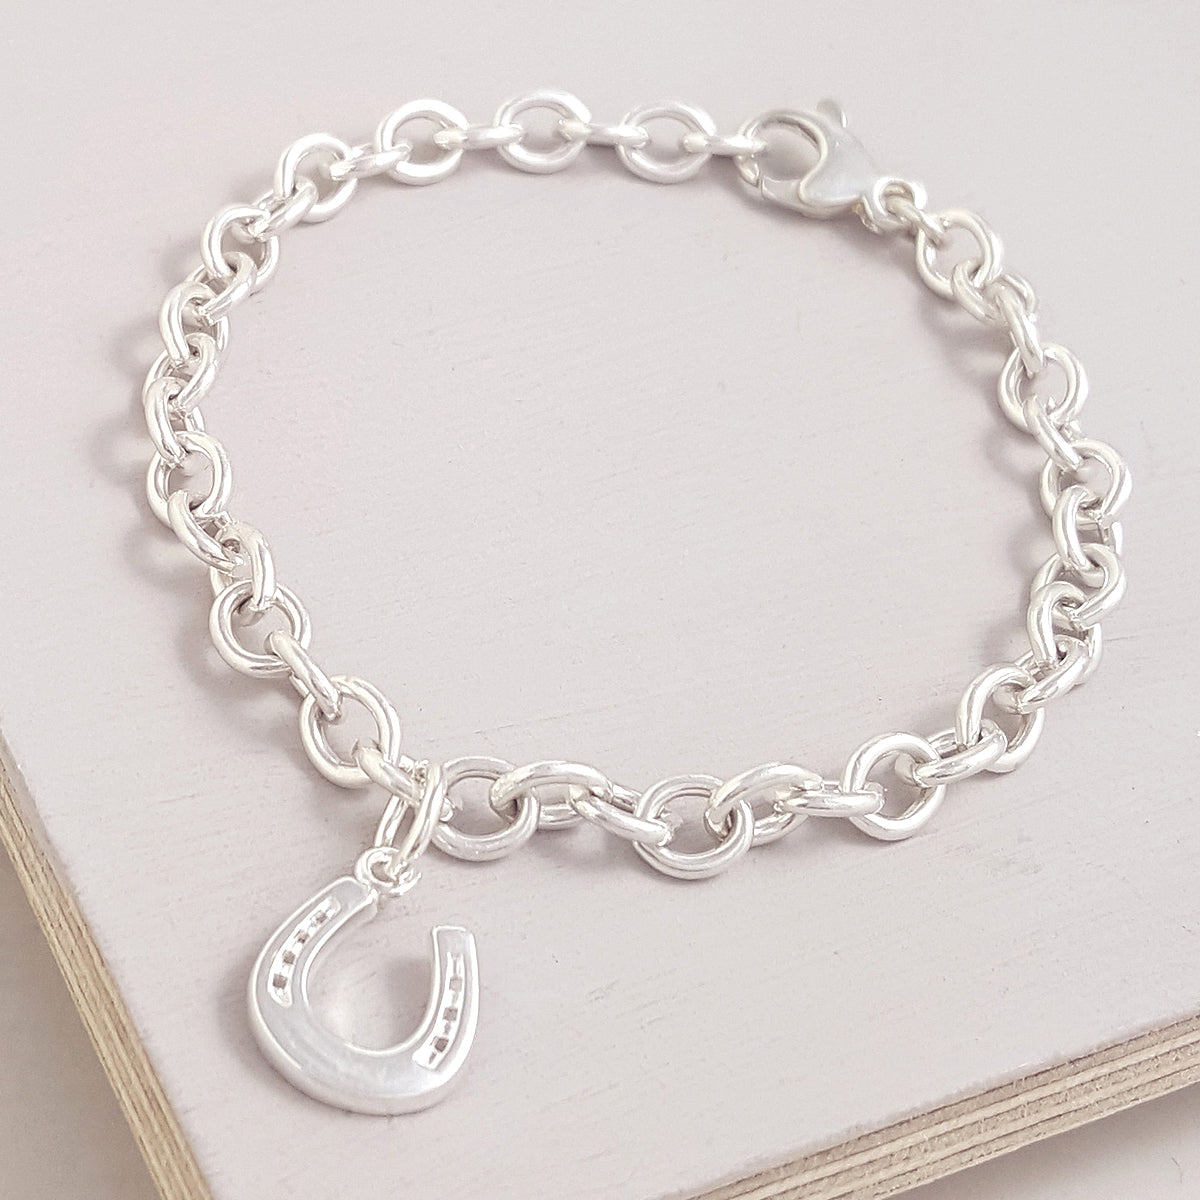 A good luck charm in solid sterling silver - fits all charm bracelets and makes a delicate lucky necklace.